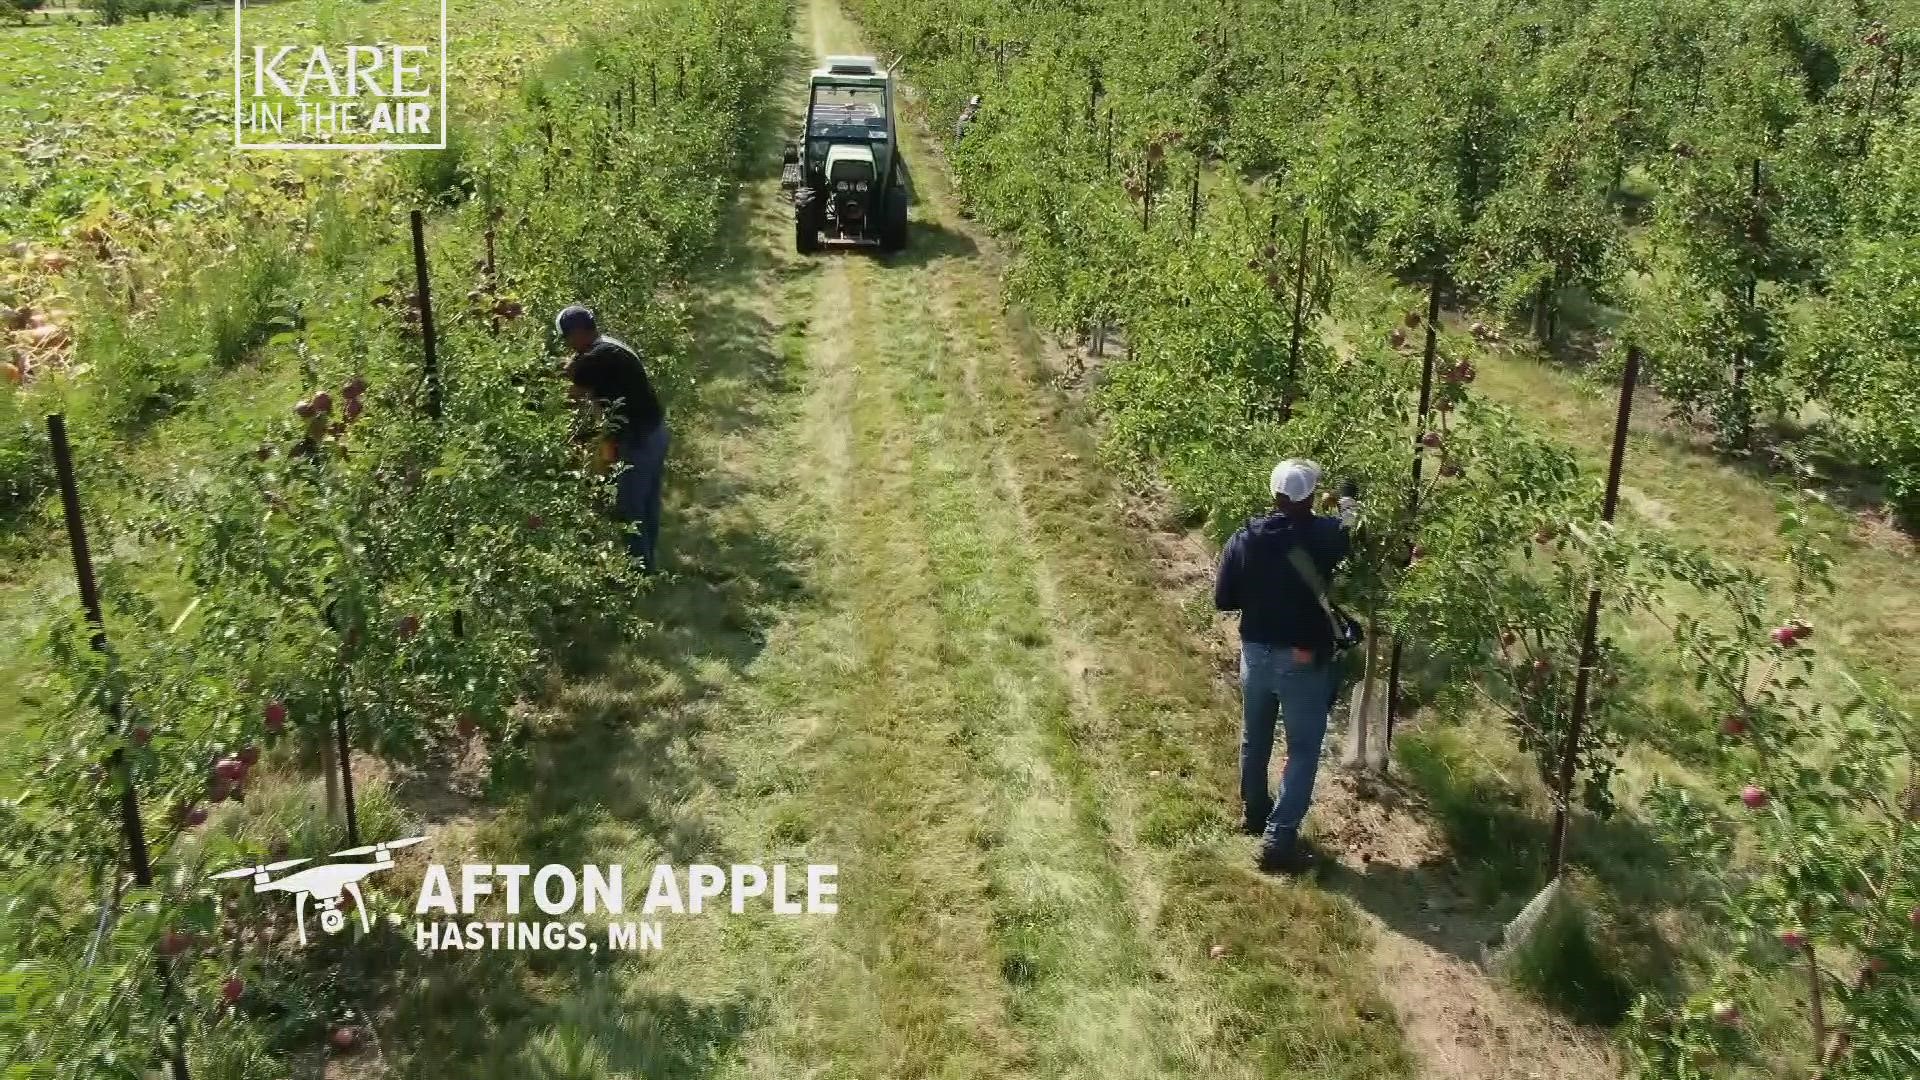 Tis the season for apple picking, and a look from the KARE 11 drone shows this Hastings-area orchard is ready for harvest.